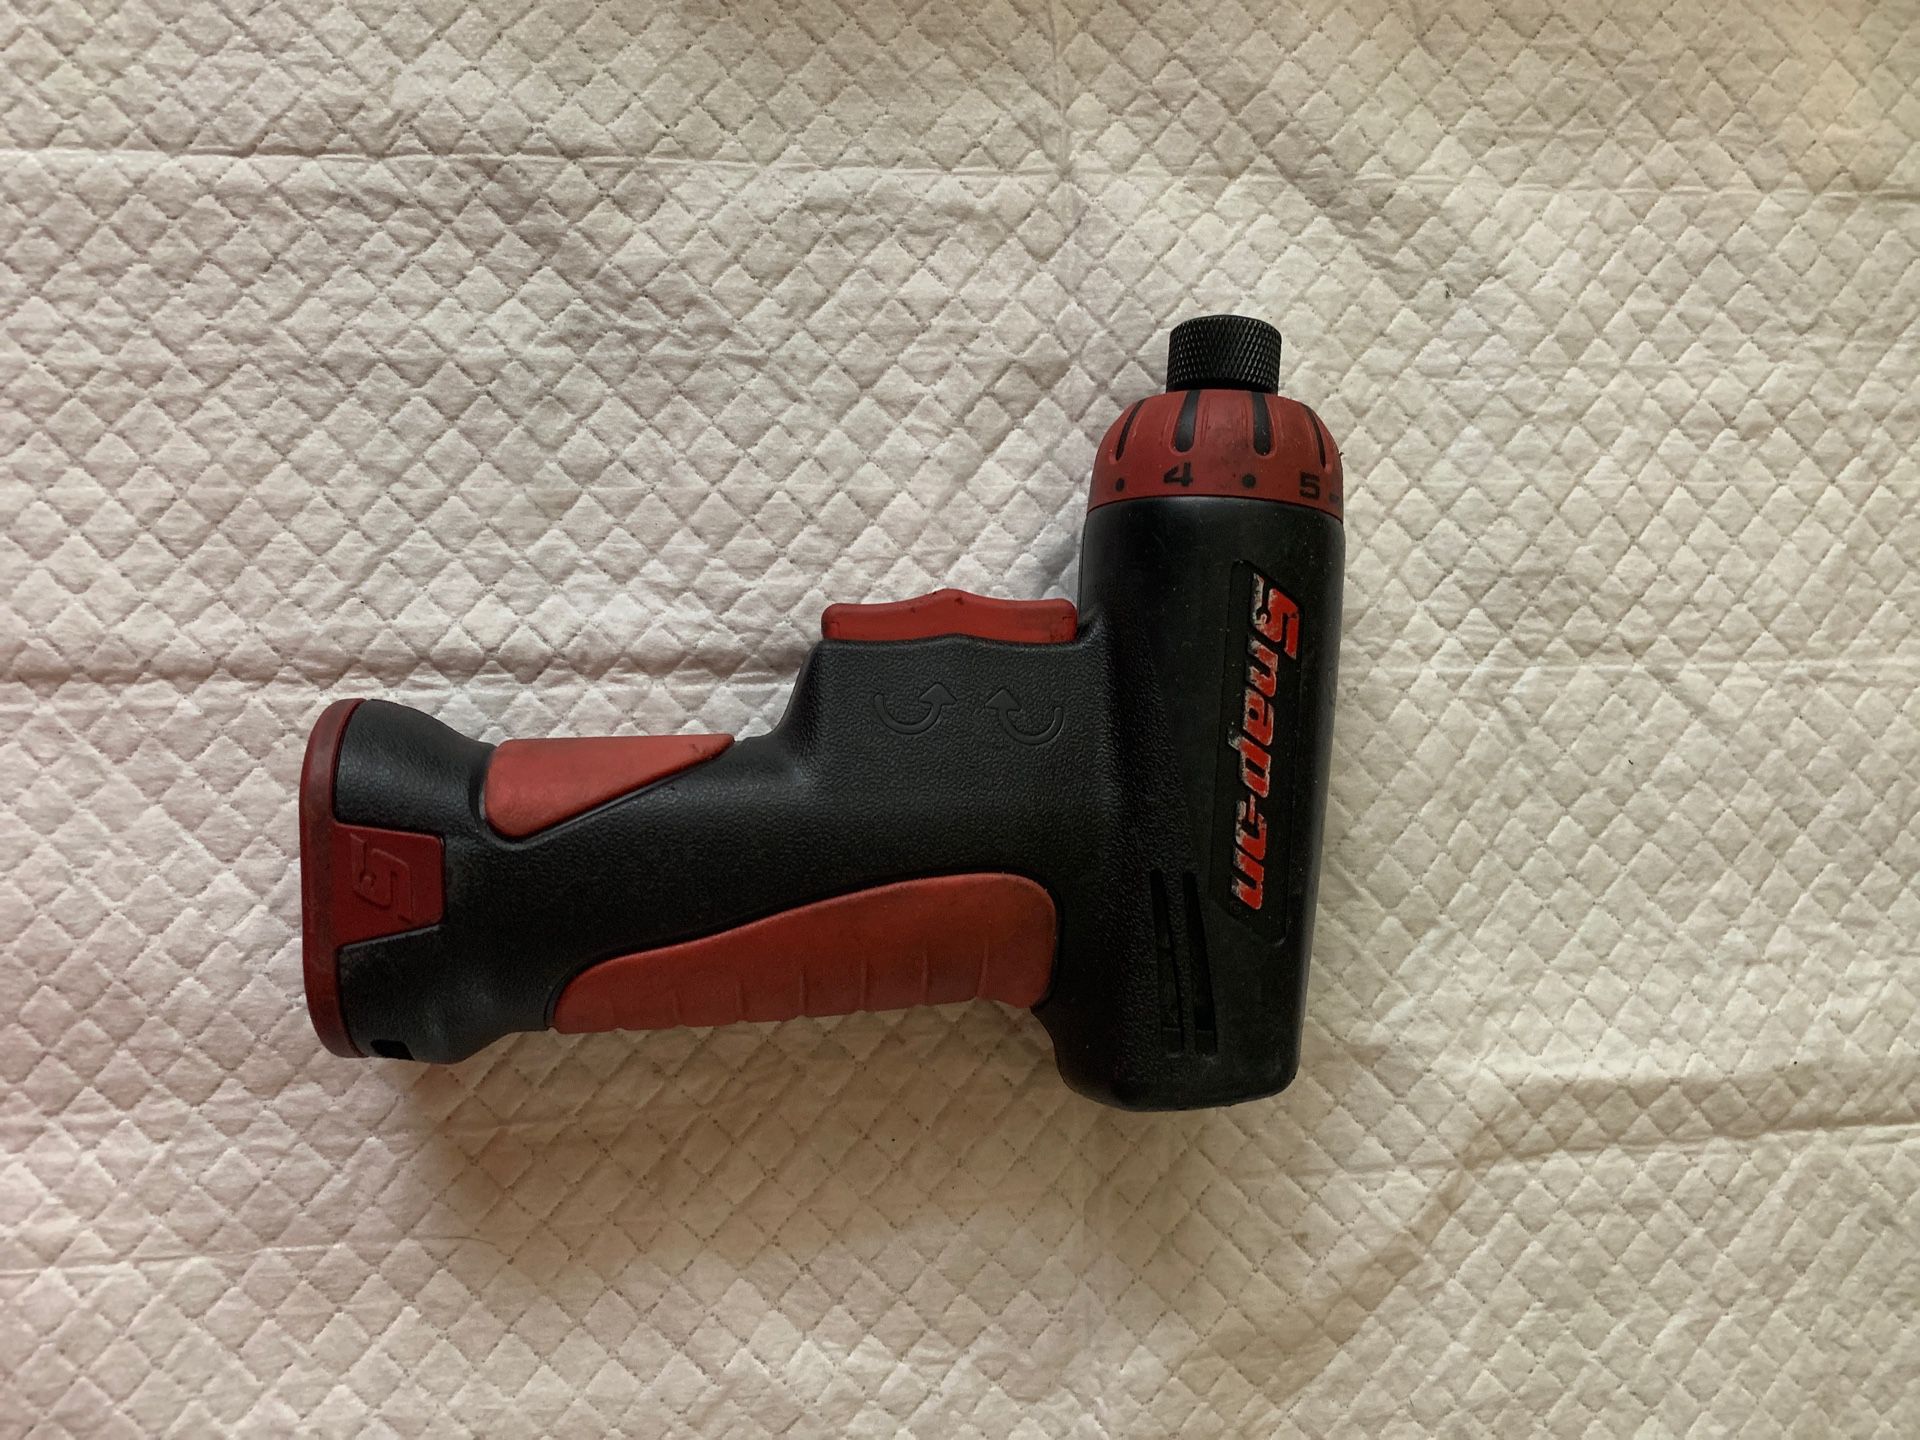 Snap on tools cordless screwdriver CTS561